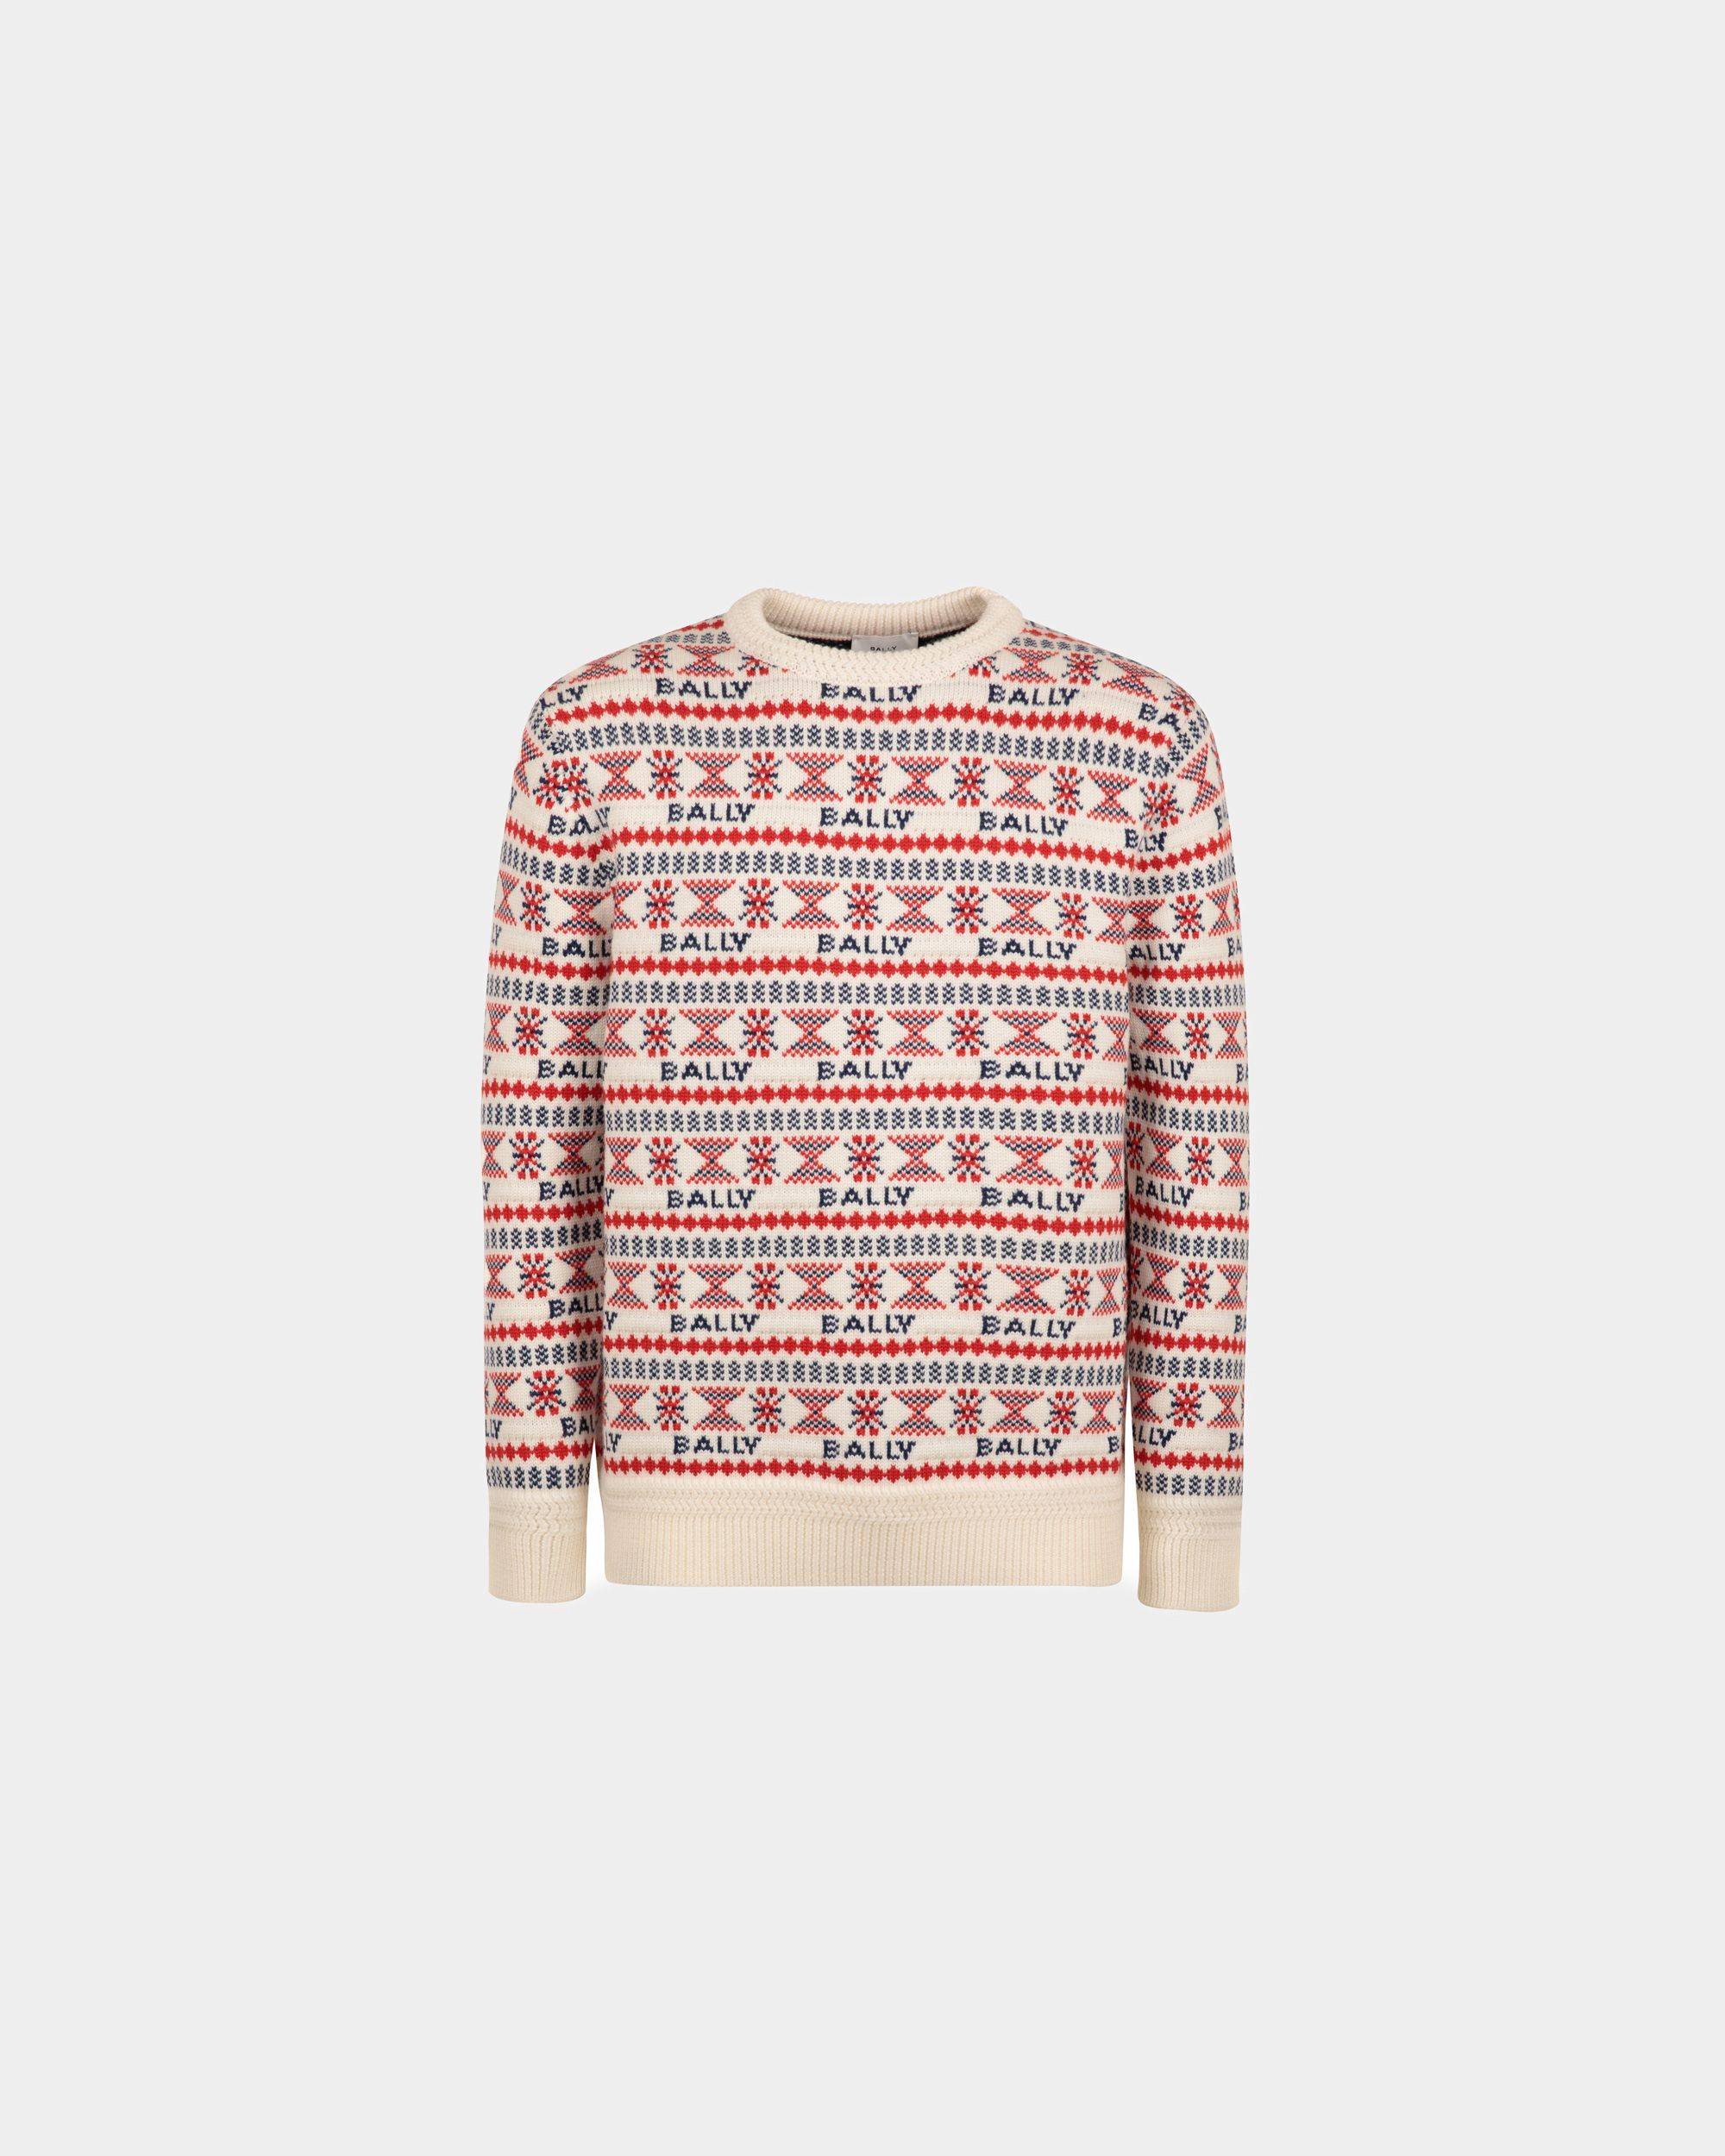 Men's Sweater In Multicolor Wool | Bally | Still Life Front